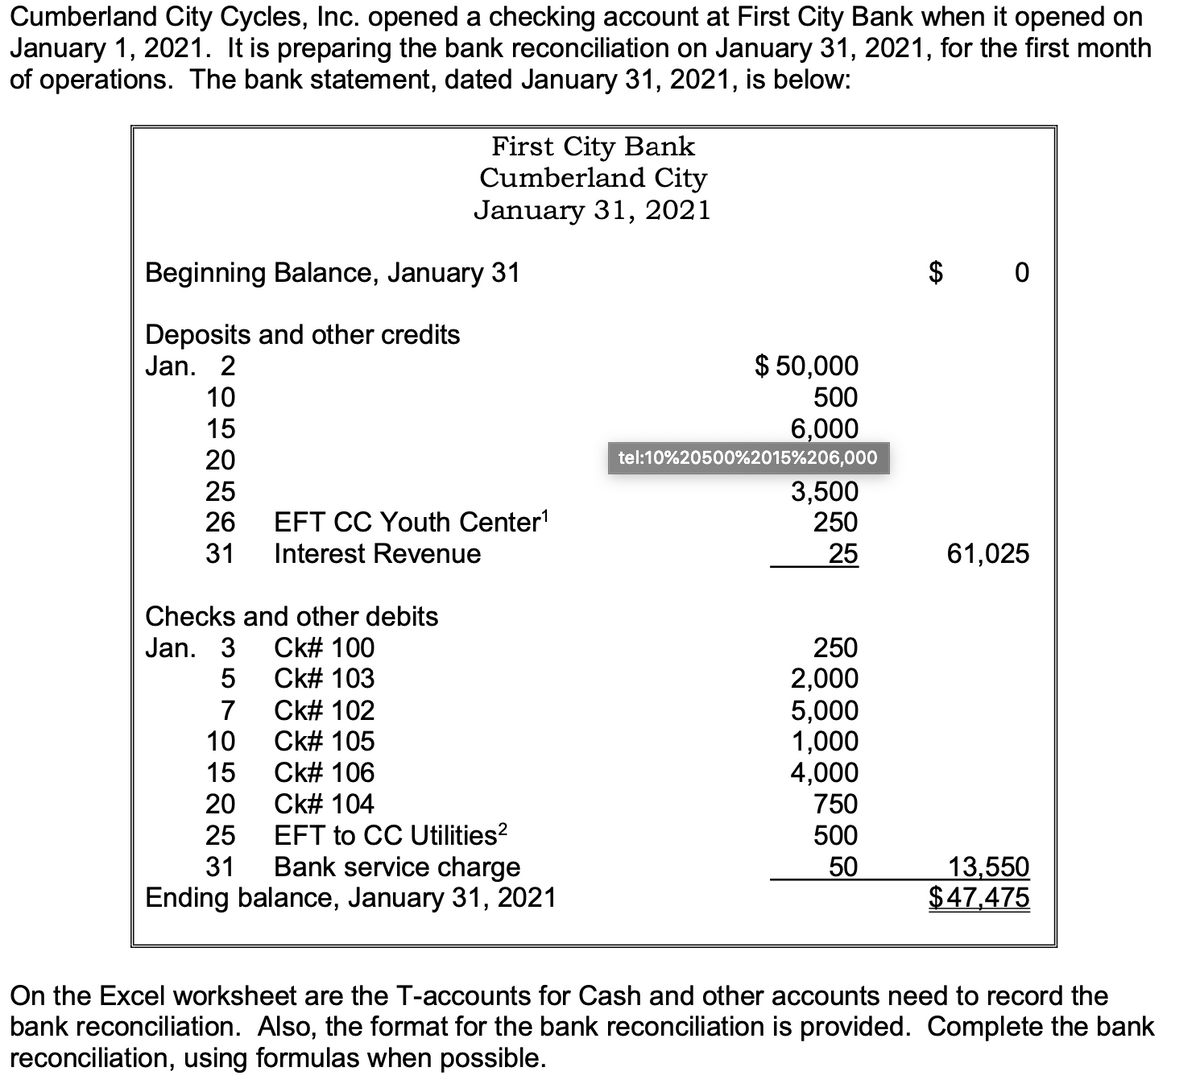 Cumberland City Cycles, Inc. opened a checking account at First City Bank when it opened on
January 1, 2021. It is preparing the bank reconciliation on January 31, 2021, for the first month
of operations. The bank statement, dated January 31, 2021, is below:
First City Bank
Cumberland City
January 31, 2021
Beginning Balance, January 31
Deposits and other credits
Jan. 2
$ 50,000
500
10
15
20
6,000
tel:10%20500%2015%206,000
25
3,500
250
26
EFT CC Youth Center'
31
Interest Revenue
25
61,025
Checks and other debits
Jan. 3
Ck# 100
250
Ck# 103
Ck# 102
2,000
5,000
1,000
4,000
750
5
7
10
Ck# 105
15
Ck# 106
20
Ck# 104
EFT to CC Utilities?
Bank service charge
Ending balance, January 31, 2021
25
500
31
50
13,550
$47,475
On the Excel worksheet are the T-accounts for Cash and other accounts need to record the
bank reconciliation. Also, the format for the bank reconciliation is provided. Complete the bank
reconciliation, using formulas when possible.
%24
